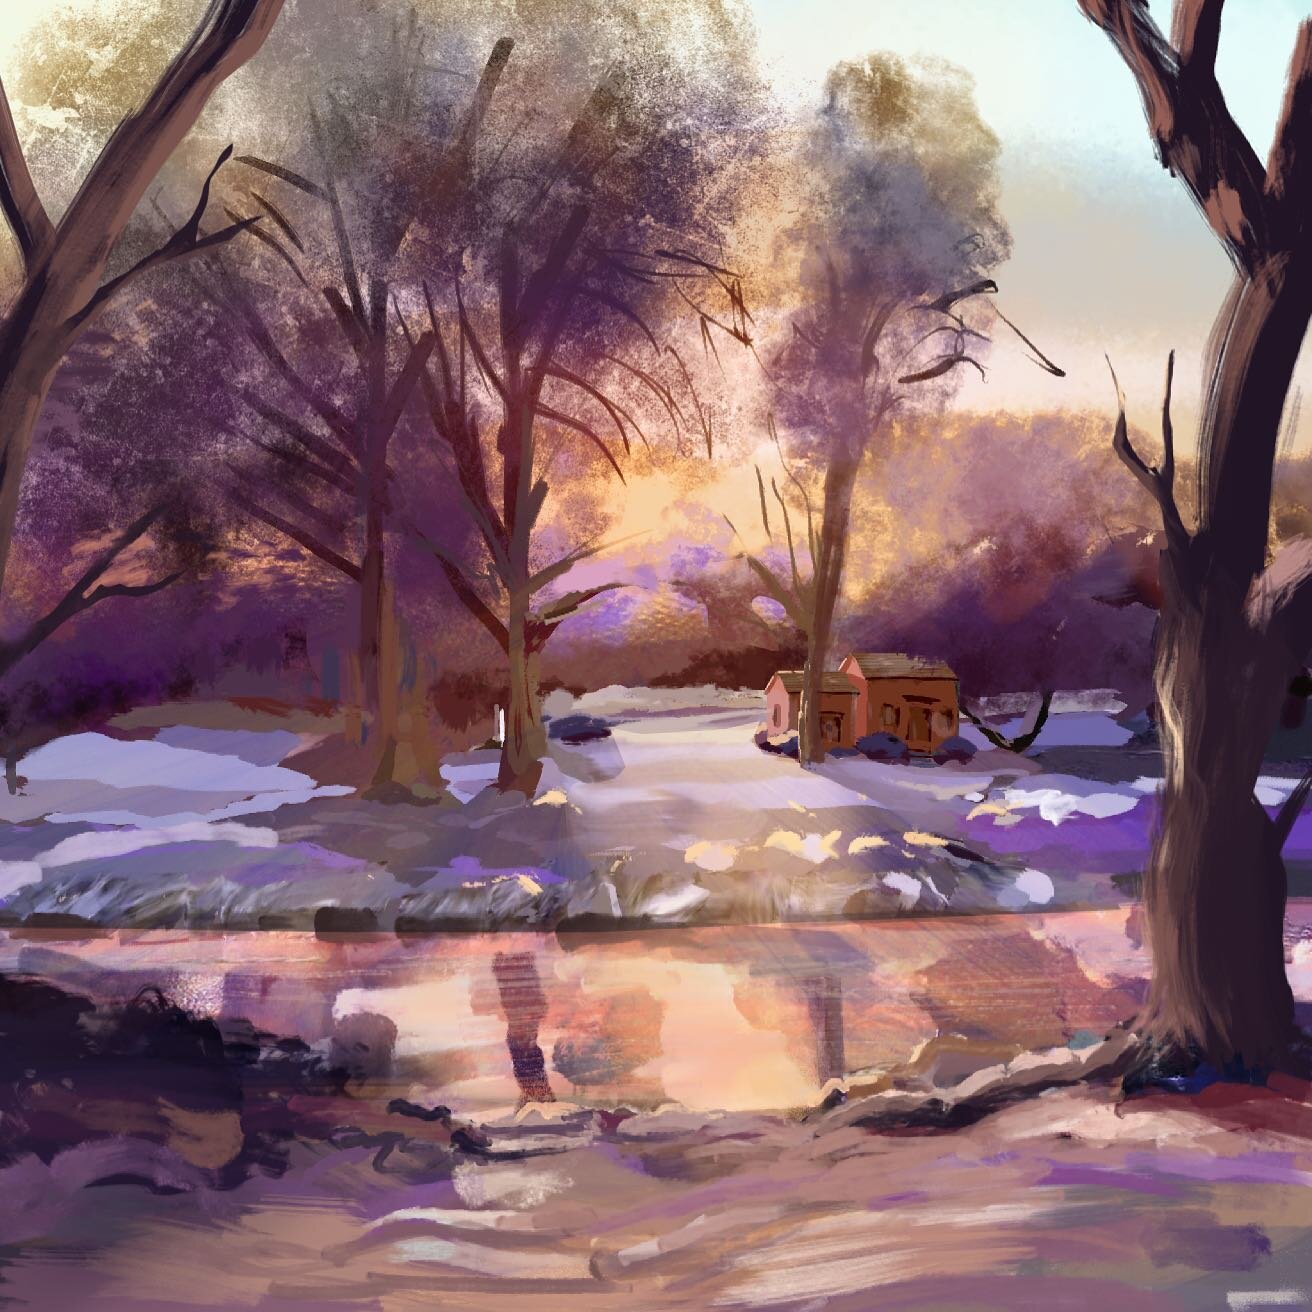 Finally got the Cintiq going again! Here is a painting I did based on a photo I took out in the hill country this pet winter. Not sure where the colors came from - the photo was daylight and mostly green
.
.
.
.
.
.
 #photoshop #wacom #cintiq
#illust